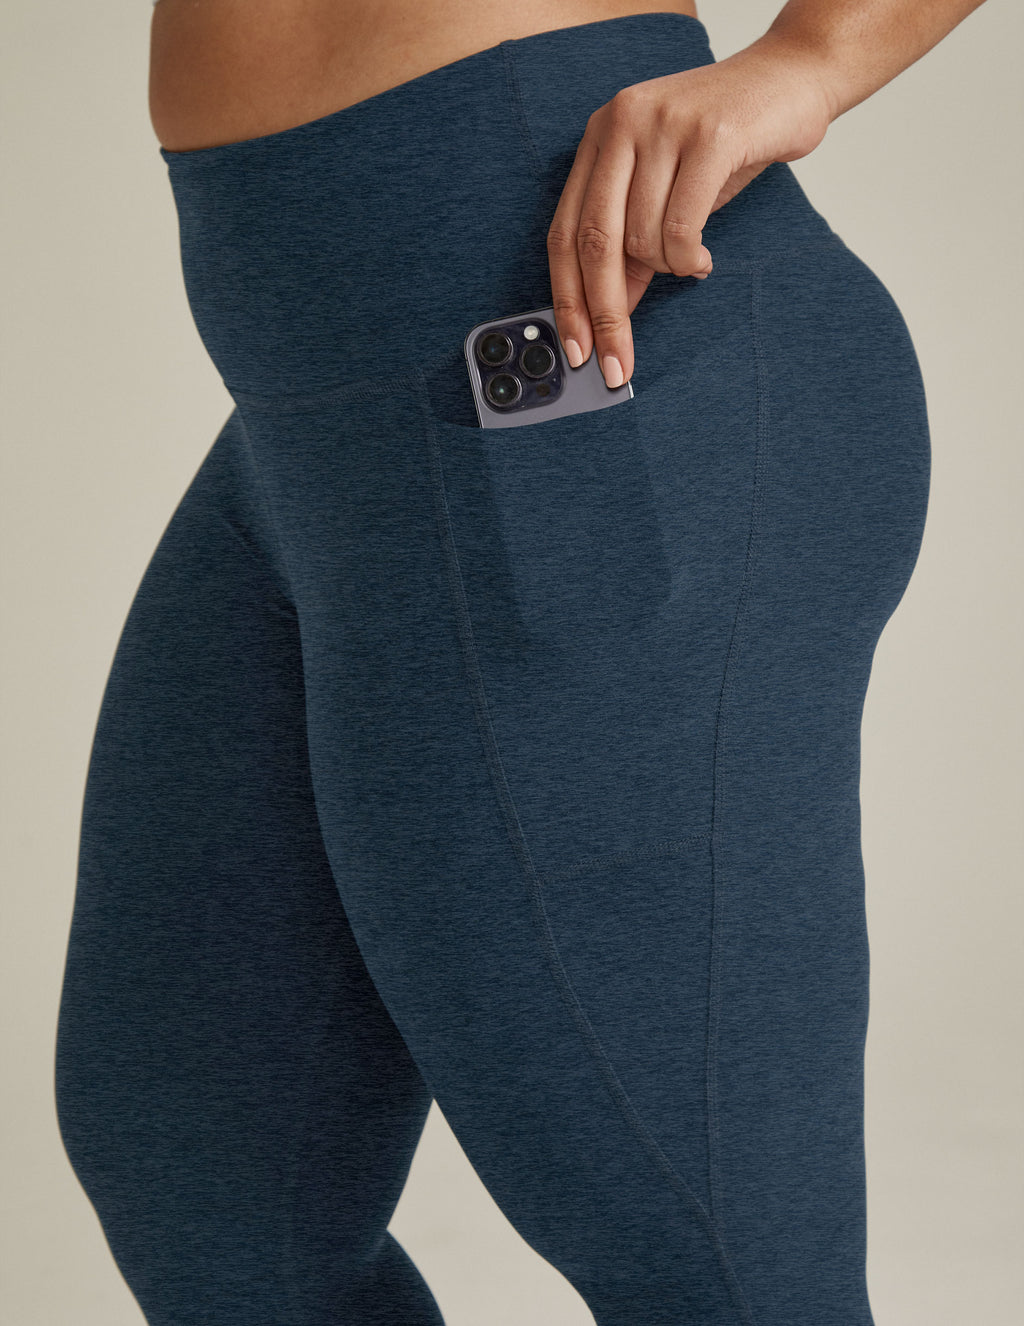 Spacedye Out Of Pocket High Waisted Midi Legging Featured Image